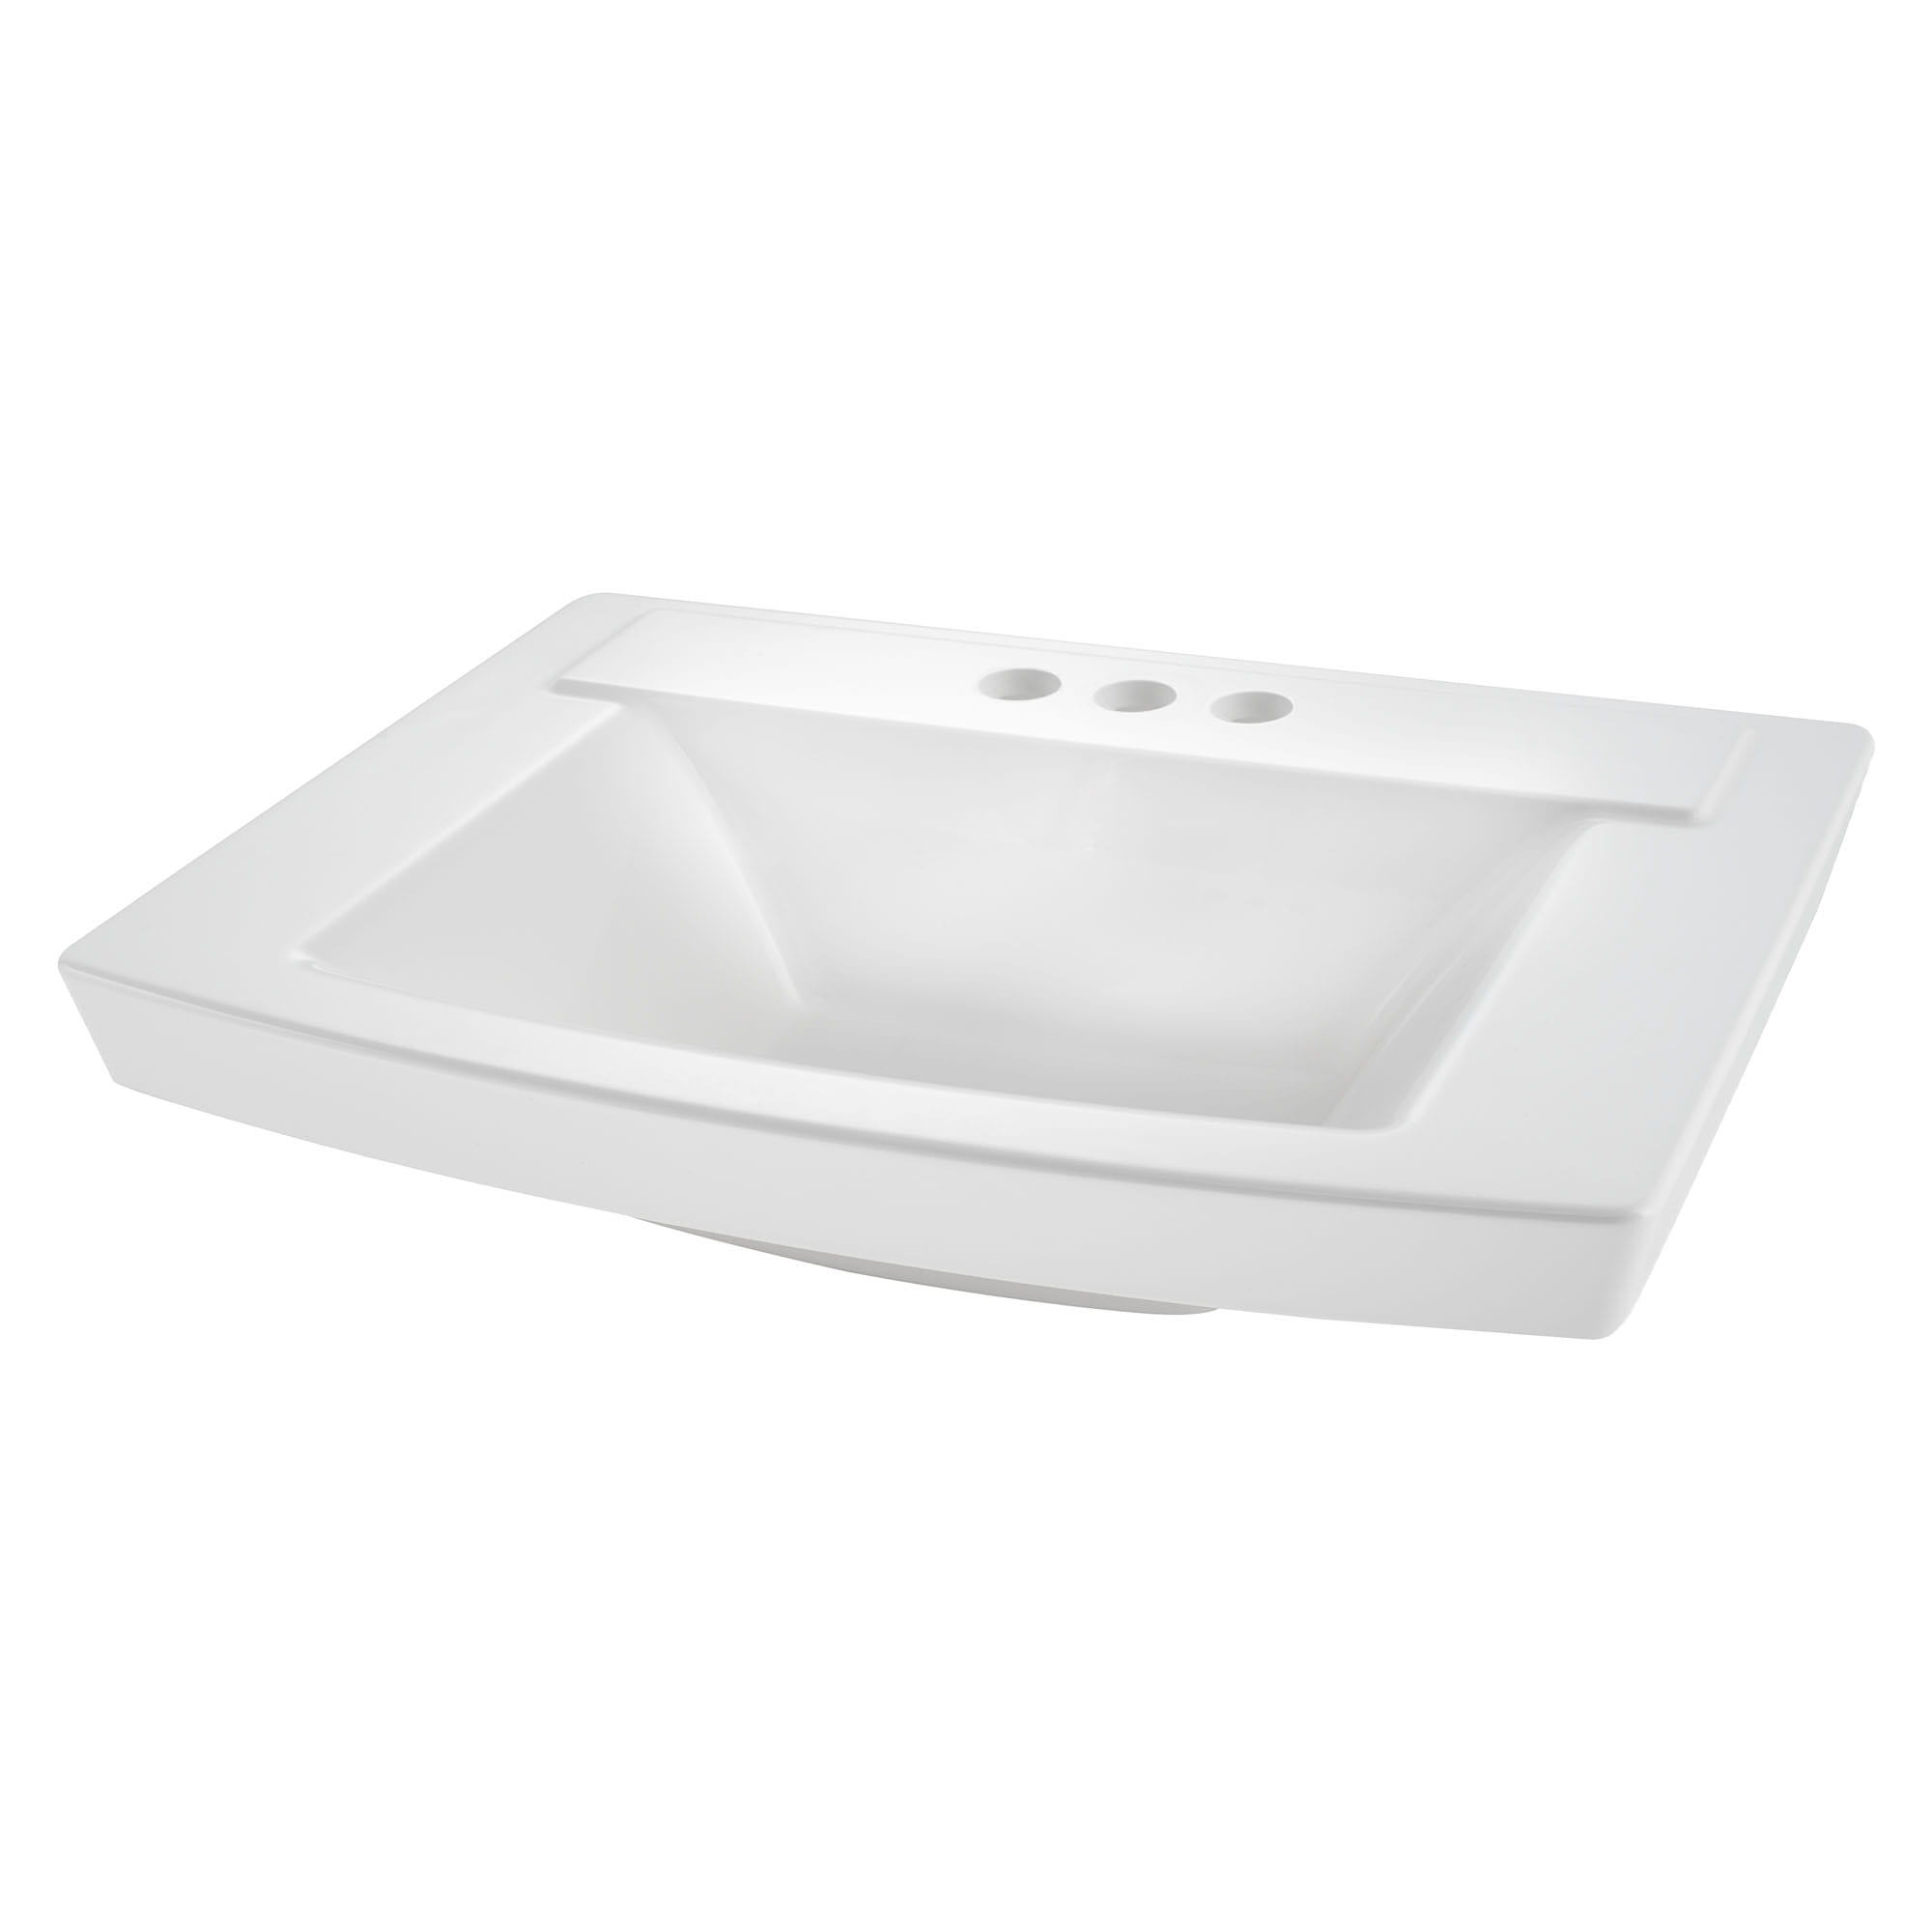 Townsend® 24 x 18-Inch Above Counter Sink With 4-Inch Centerset